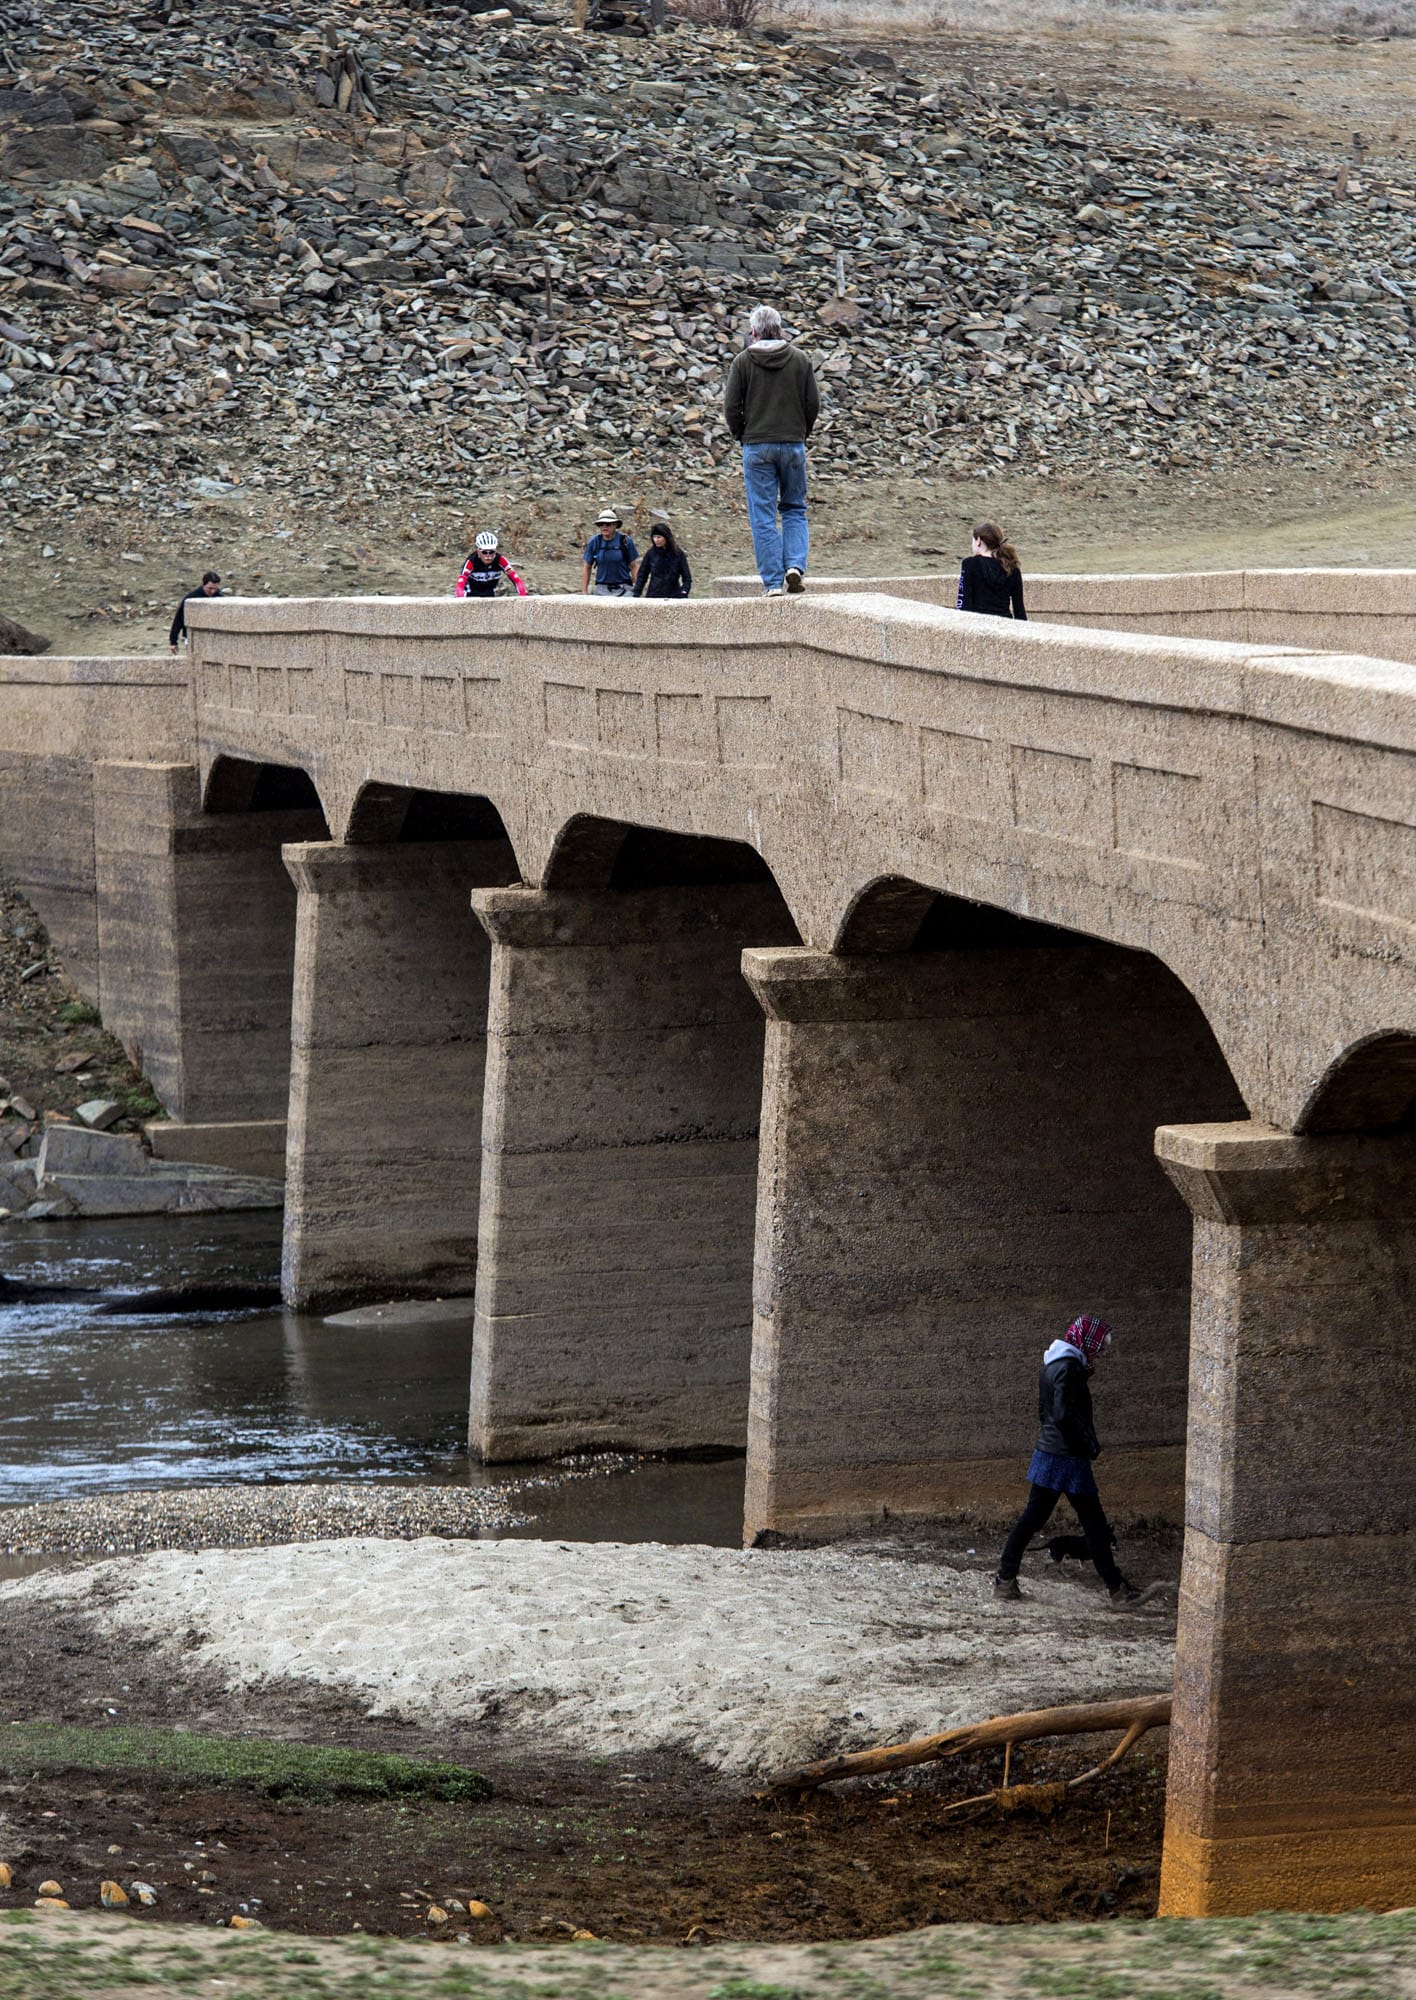 Visitors walk over Salmon Falls Bridge, normally submerged under water, at Folsom Lake in California last month.